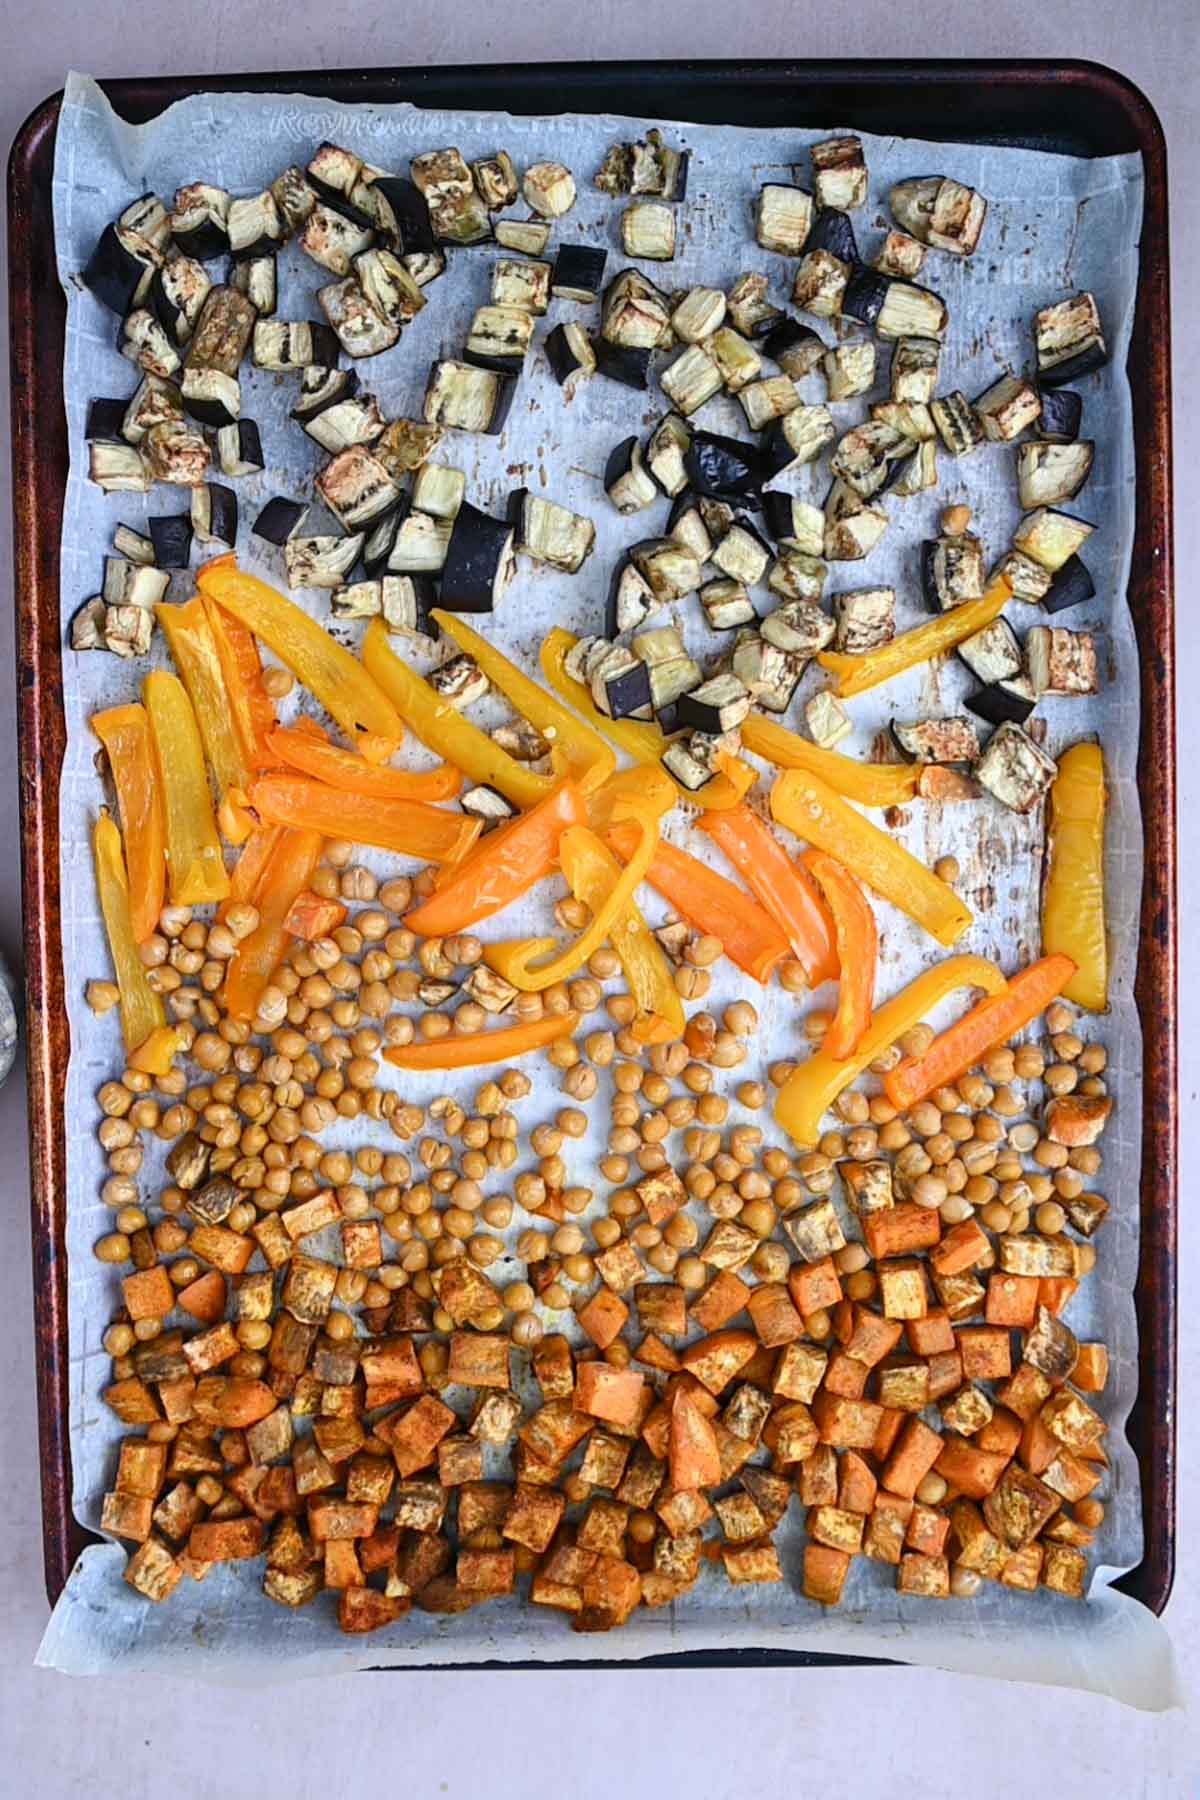 Bell pepper, eggplant, chickpeas, and sweet potato on a sheet pan after roasting.